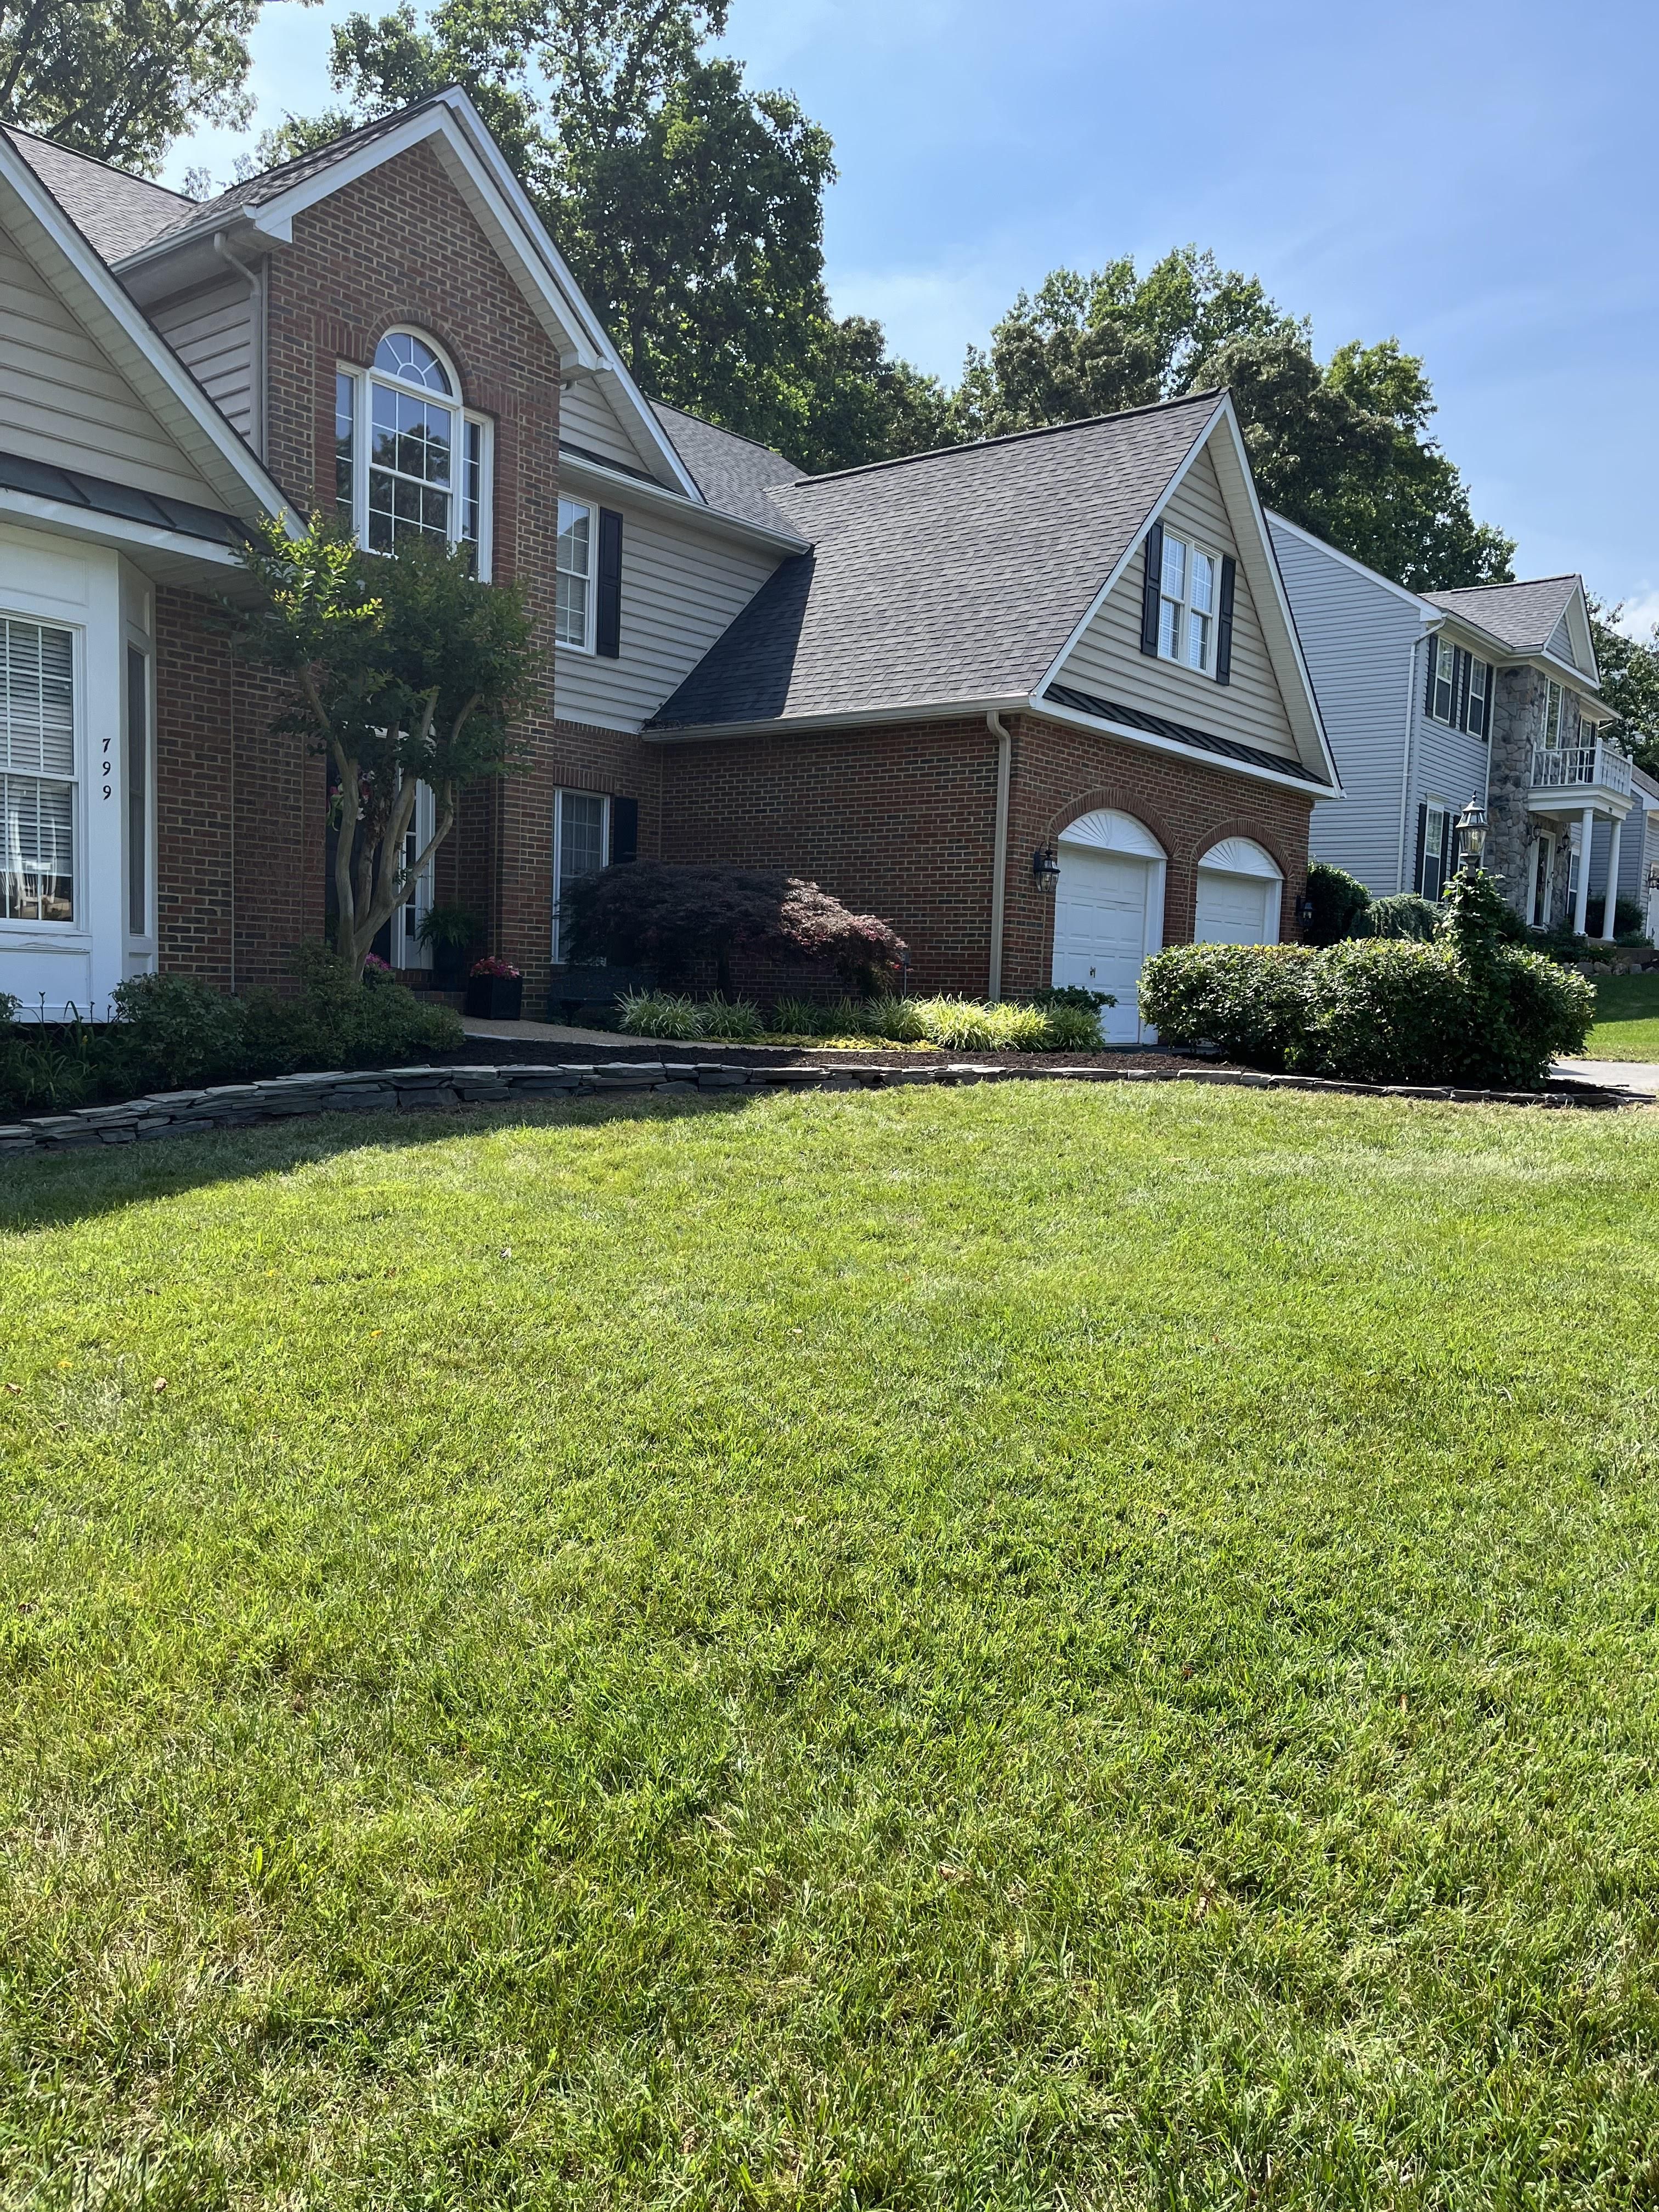 Mowing for C and C Lawn Care Services in Fredericksburg, VA